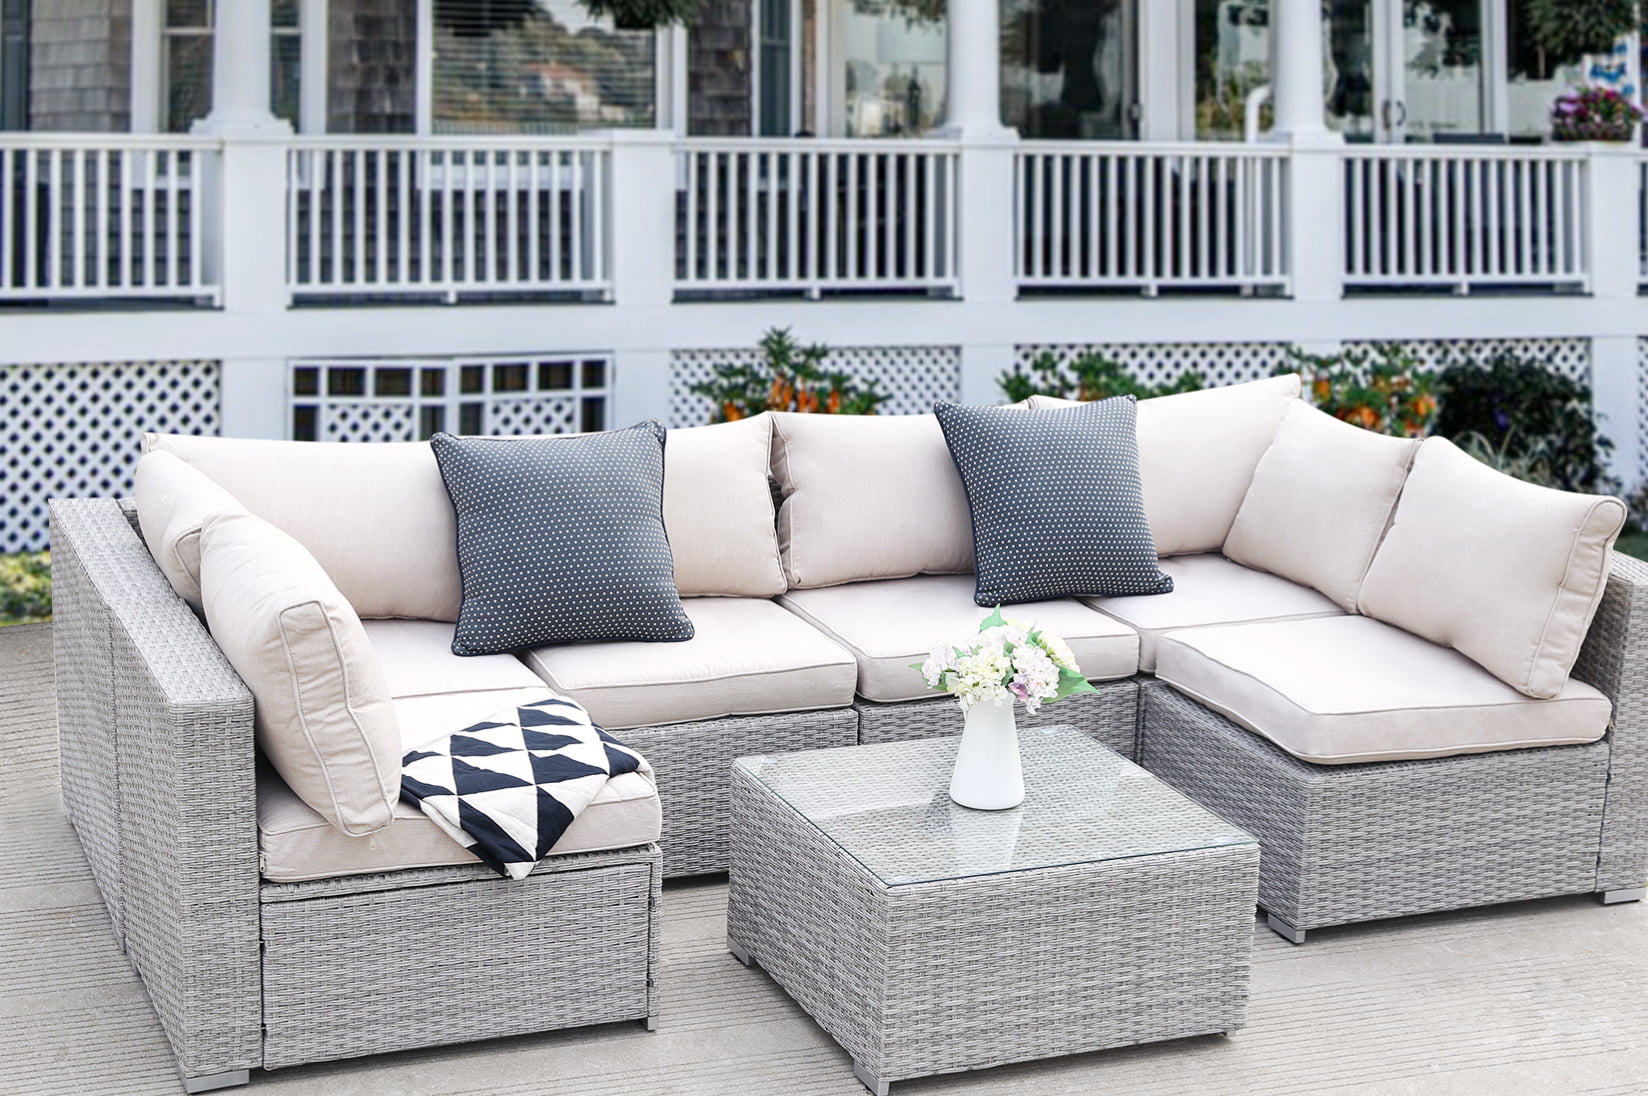 Clearance! Patio Outdoor Furniture Sets, 7 Pieces All-Weather Rattan Sectional Sofa with Tea